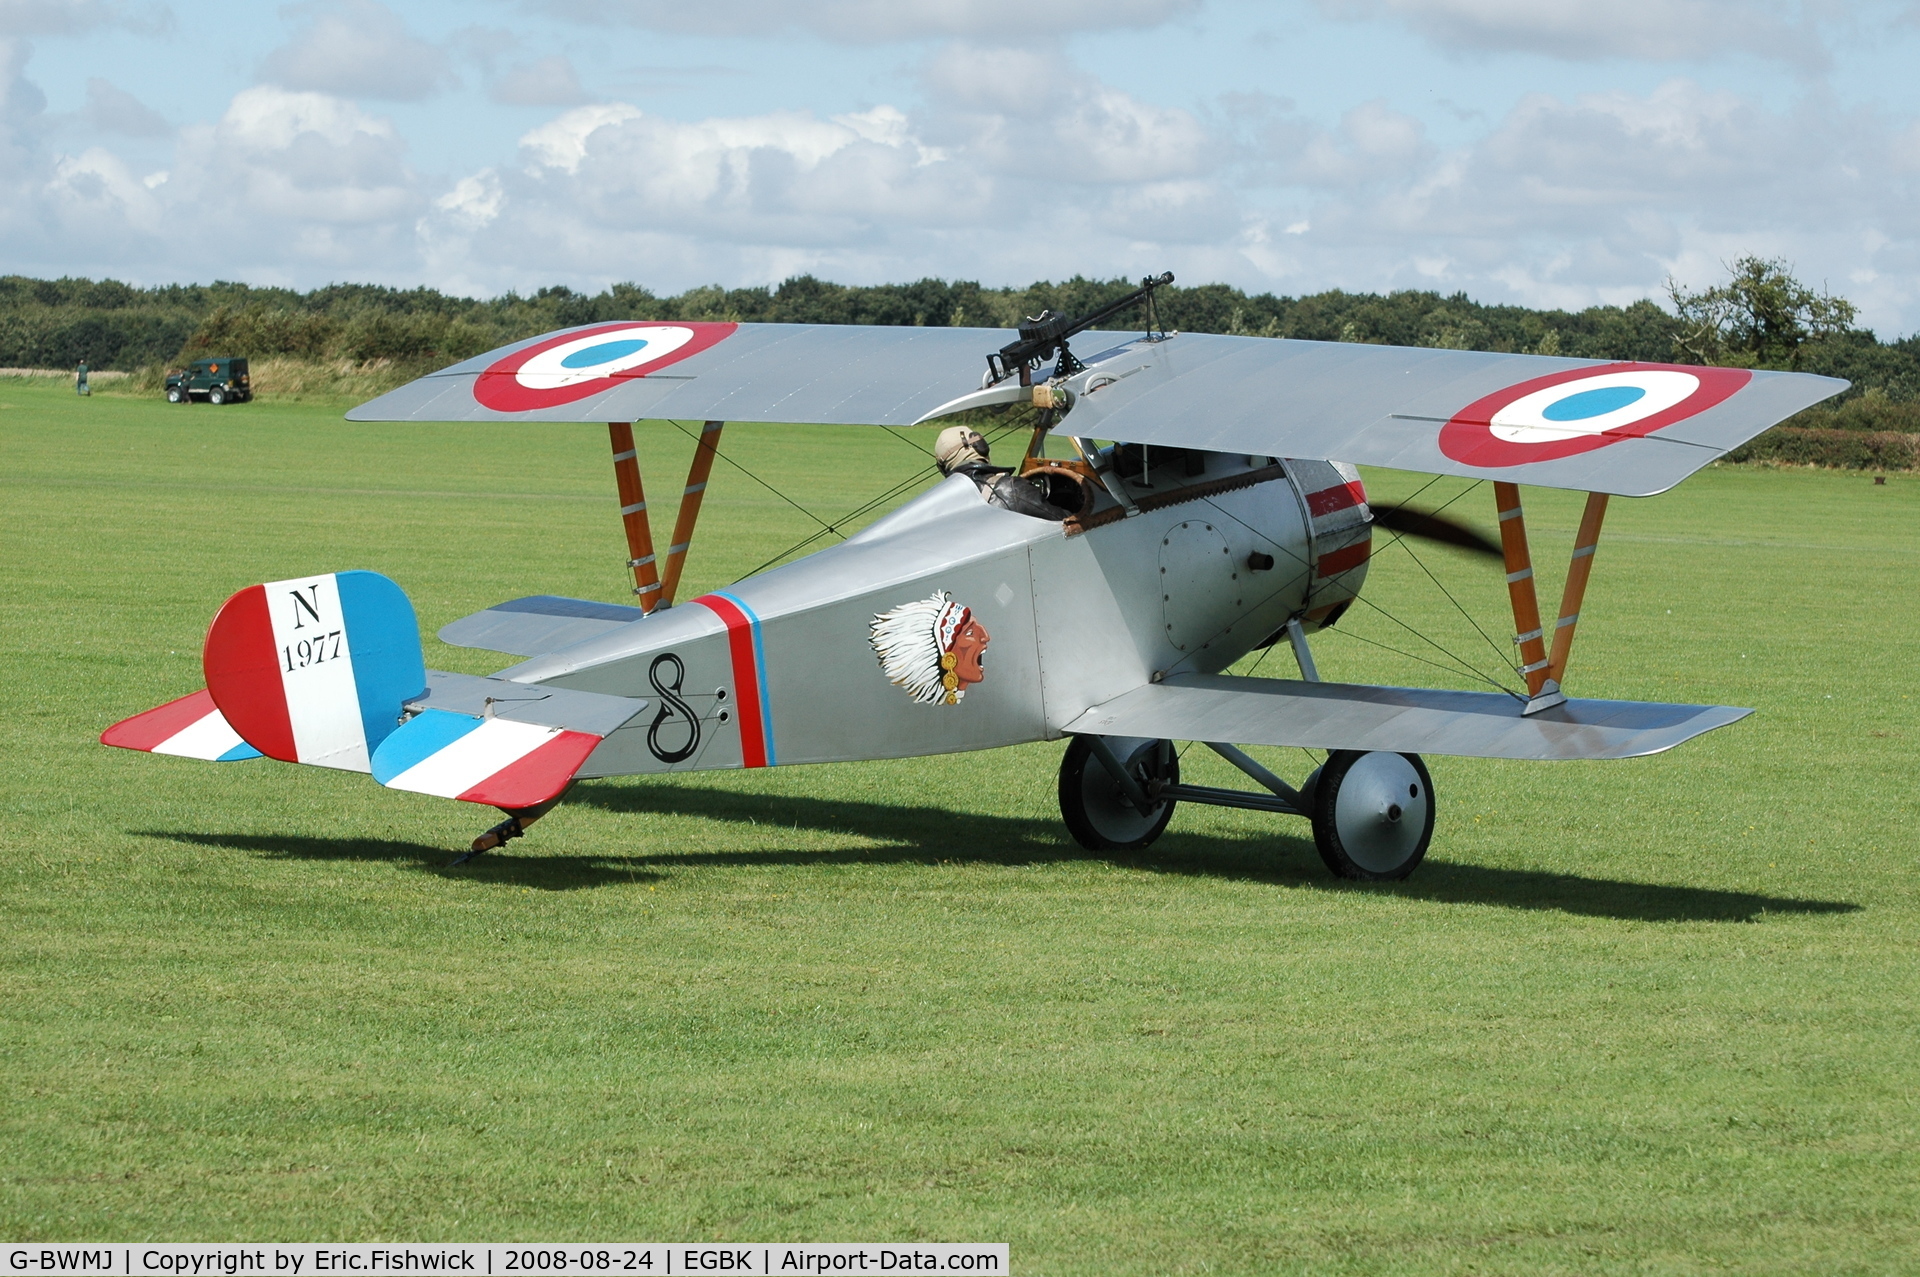 G-BWMJ, 1981 Nieuport 17 Scout Replica C/N PFA 121-12351, 2. N1977 at the Sywell Airshow 24 Aug 2008